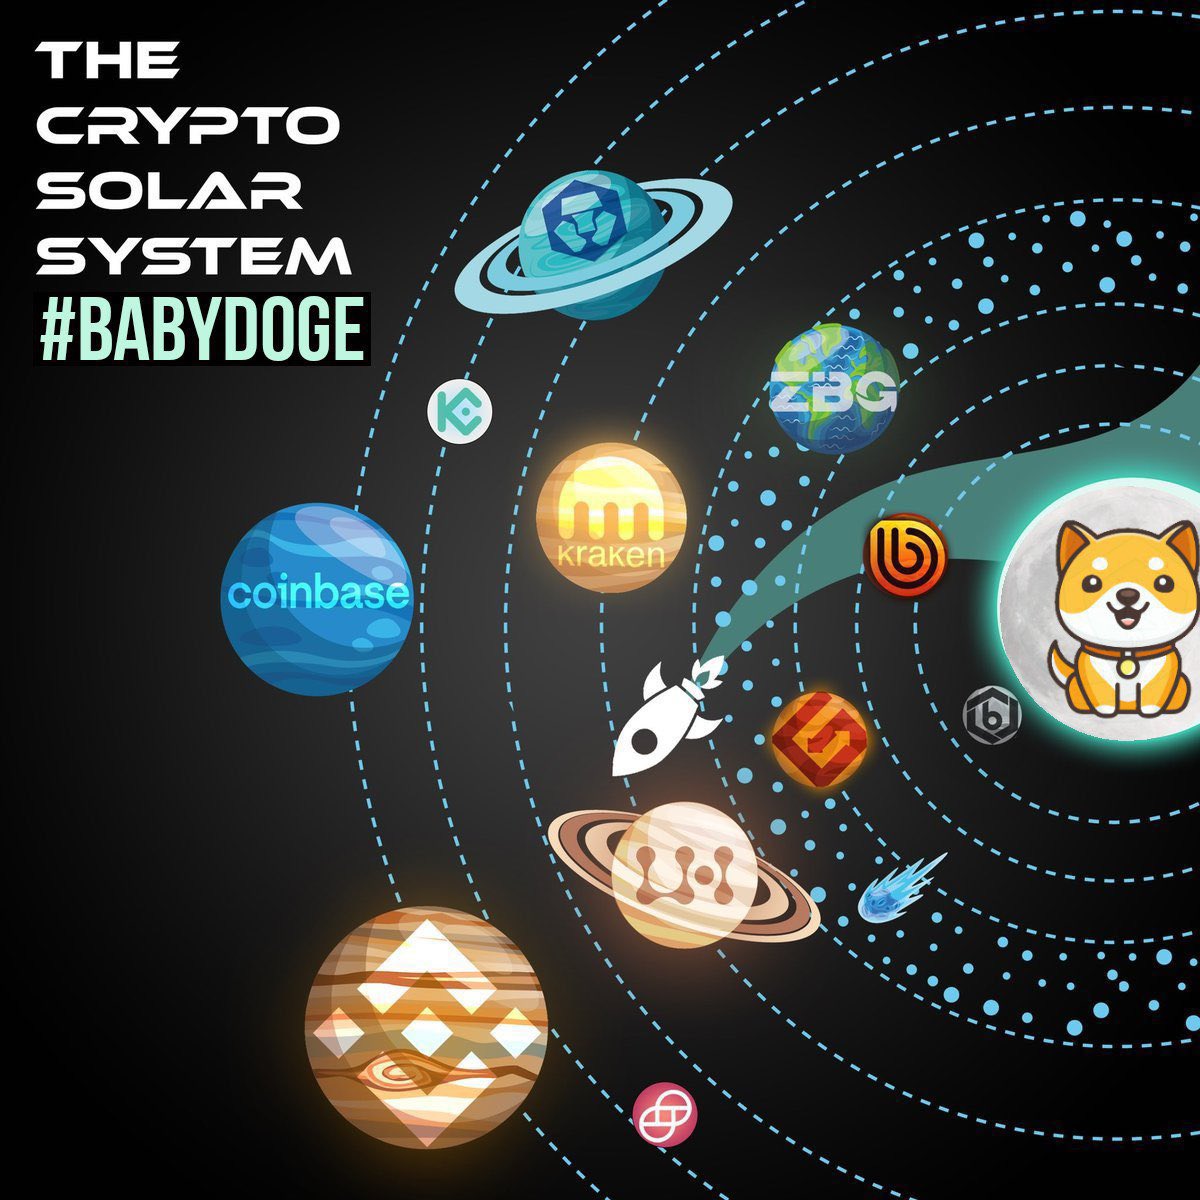 @TheNY_Girl @BabyDogeCoin @BabyCakeBSC @EverRise @FEGtoken #BabyDoge #BabyDogeCoin will 🚀🚀 just a matter of time 💎🙌🏽